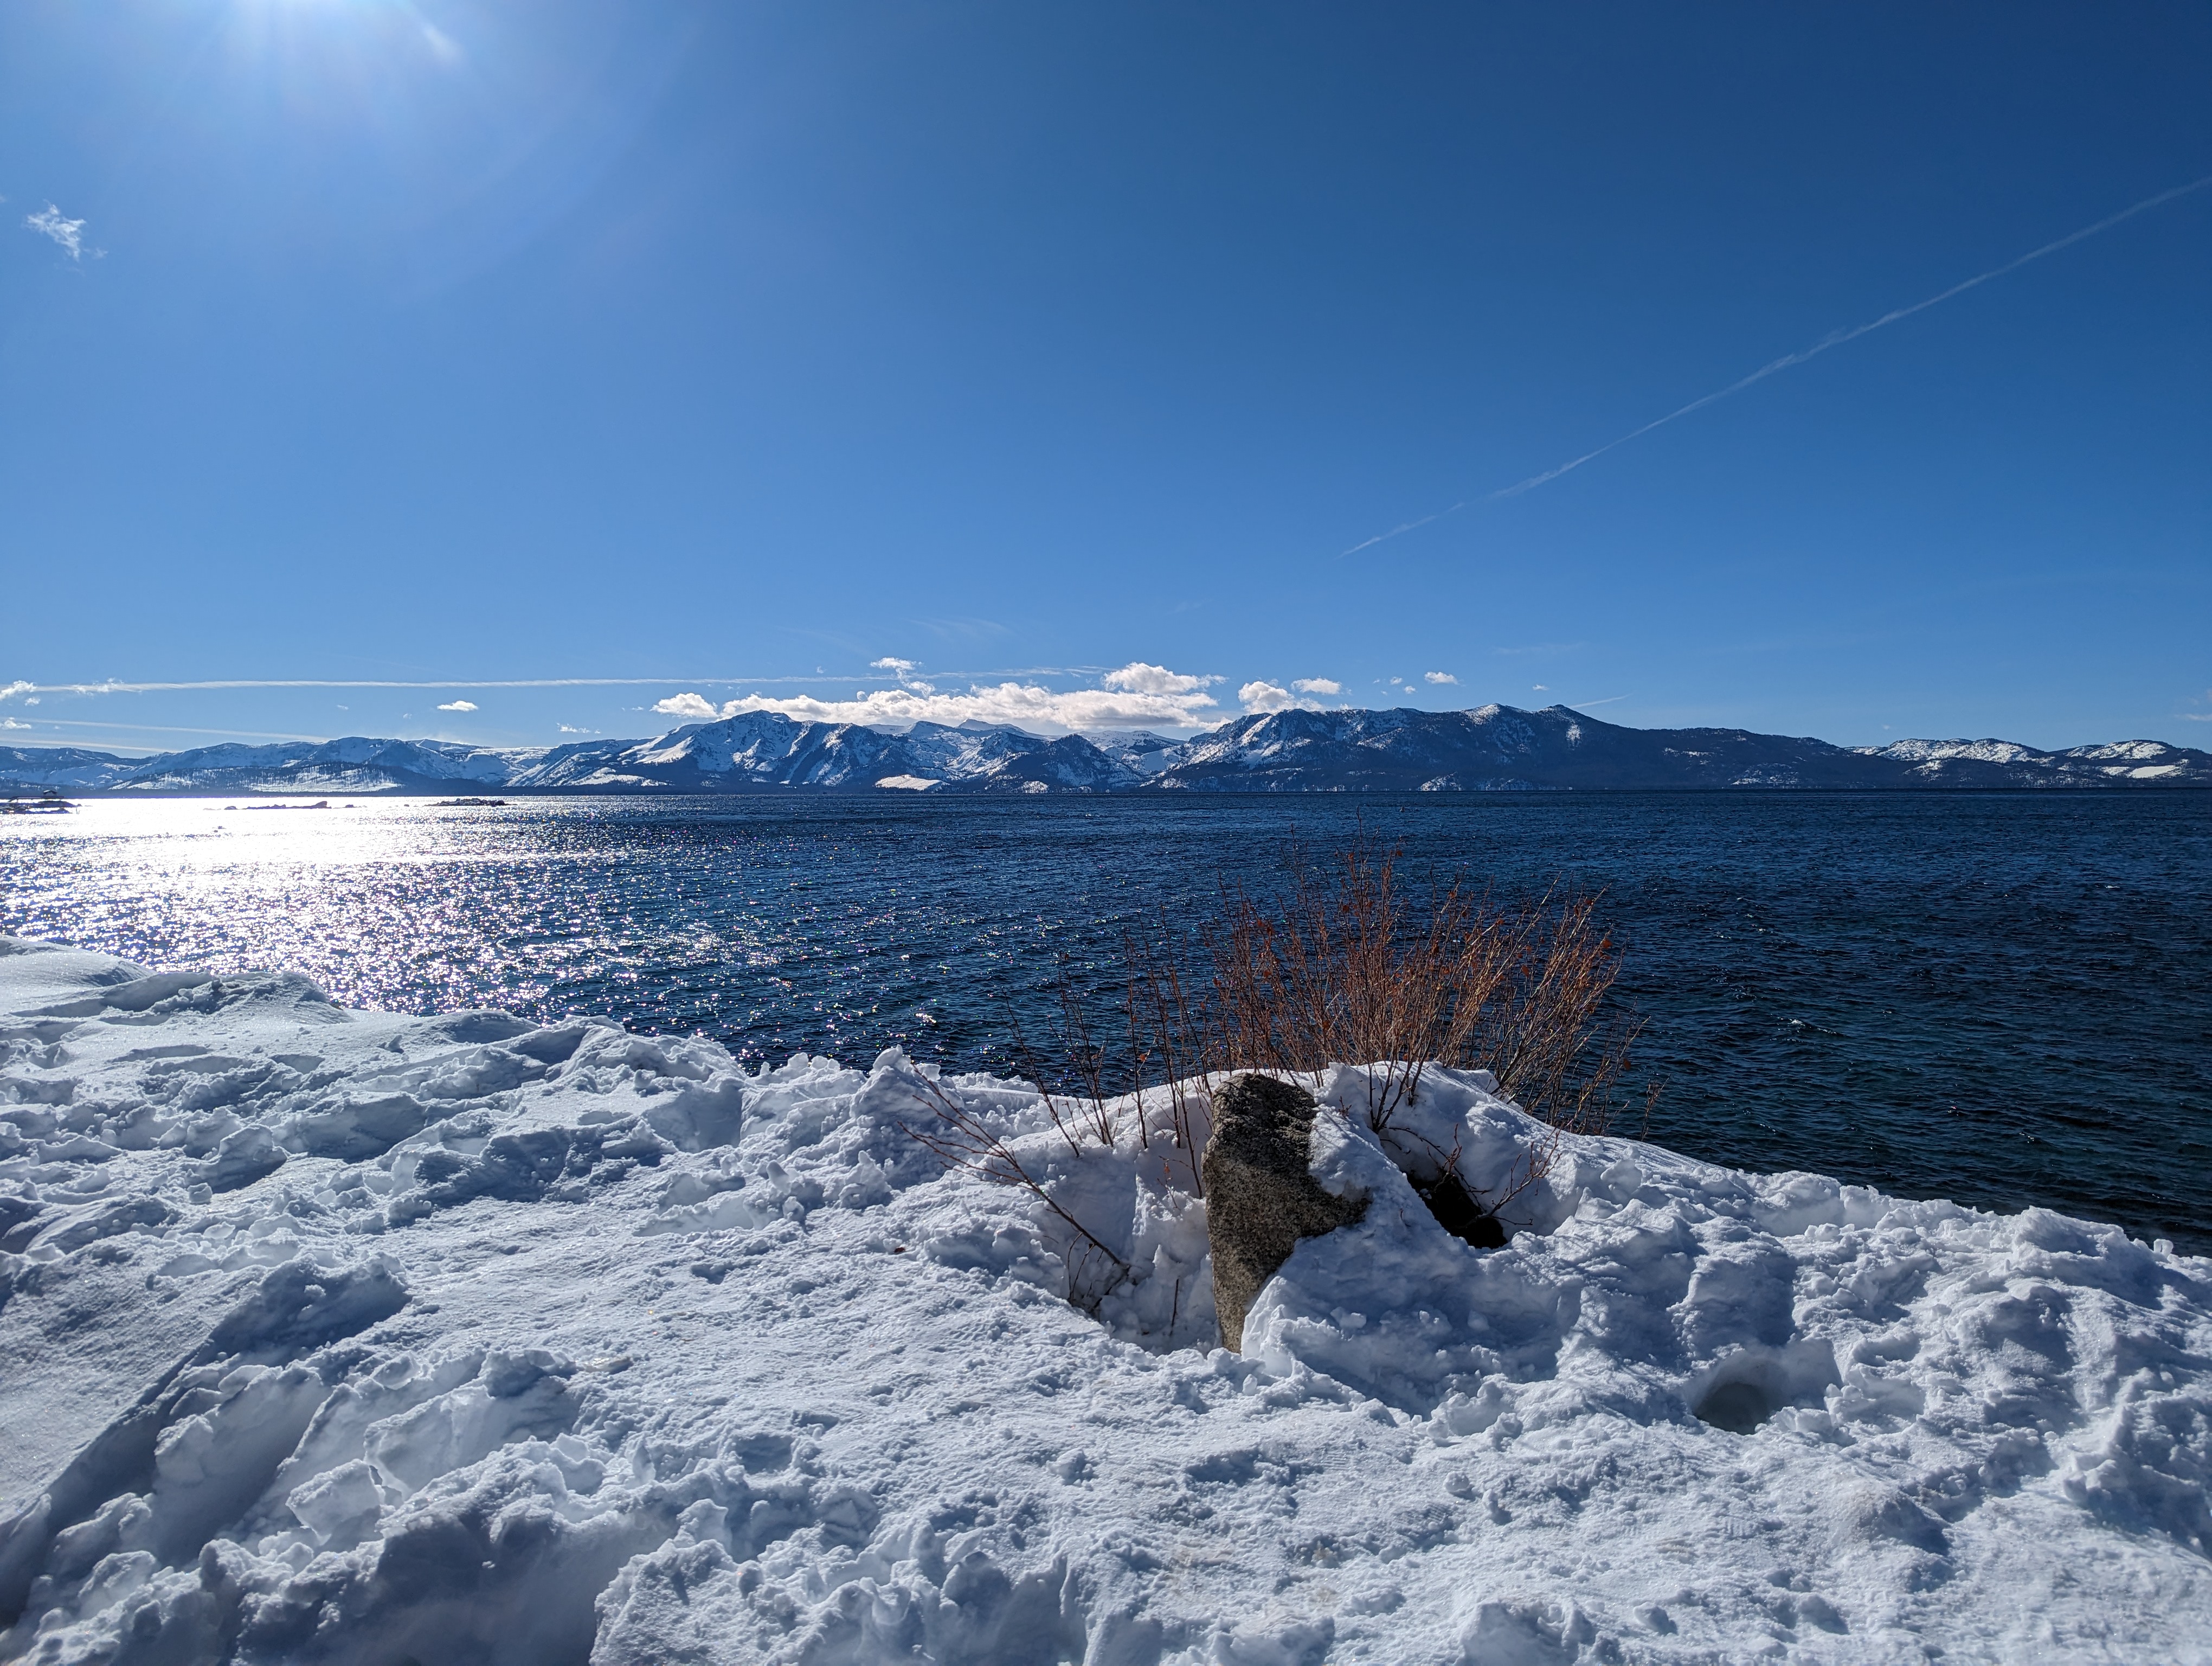 Photo Looking over lake Tahoe with deep snow on the Bank and snow caped mountains in the distance